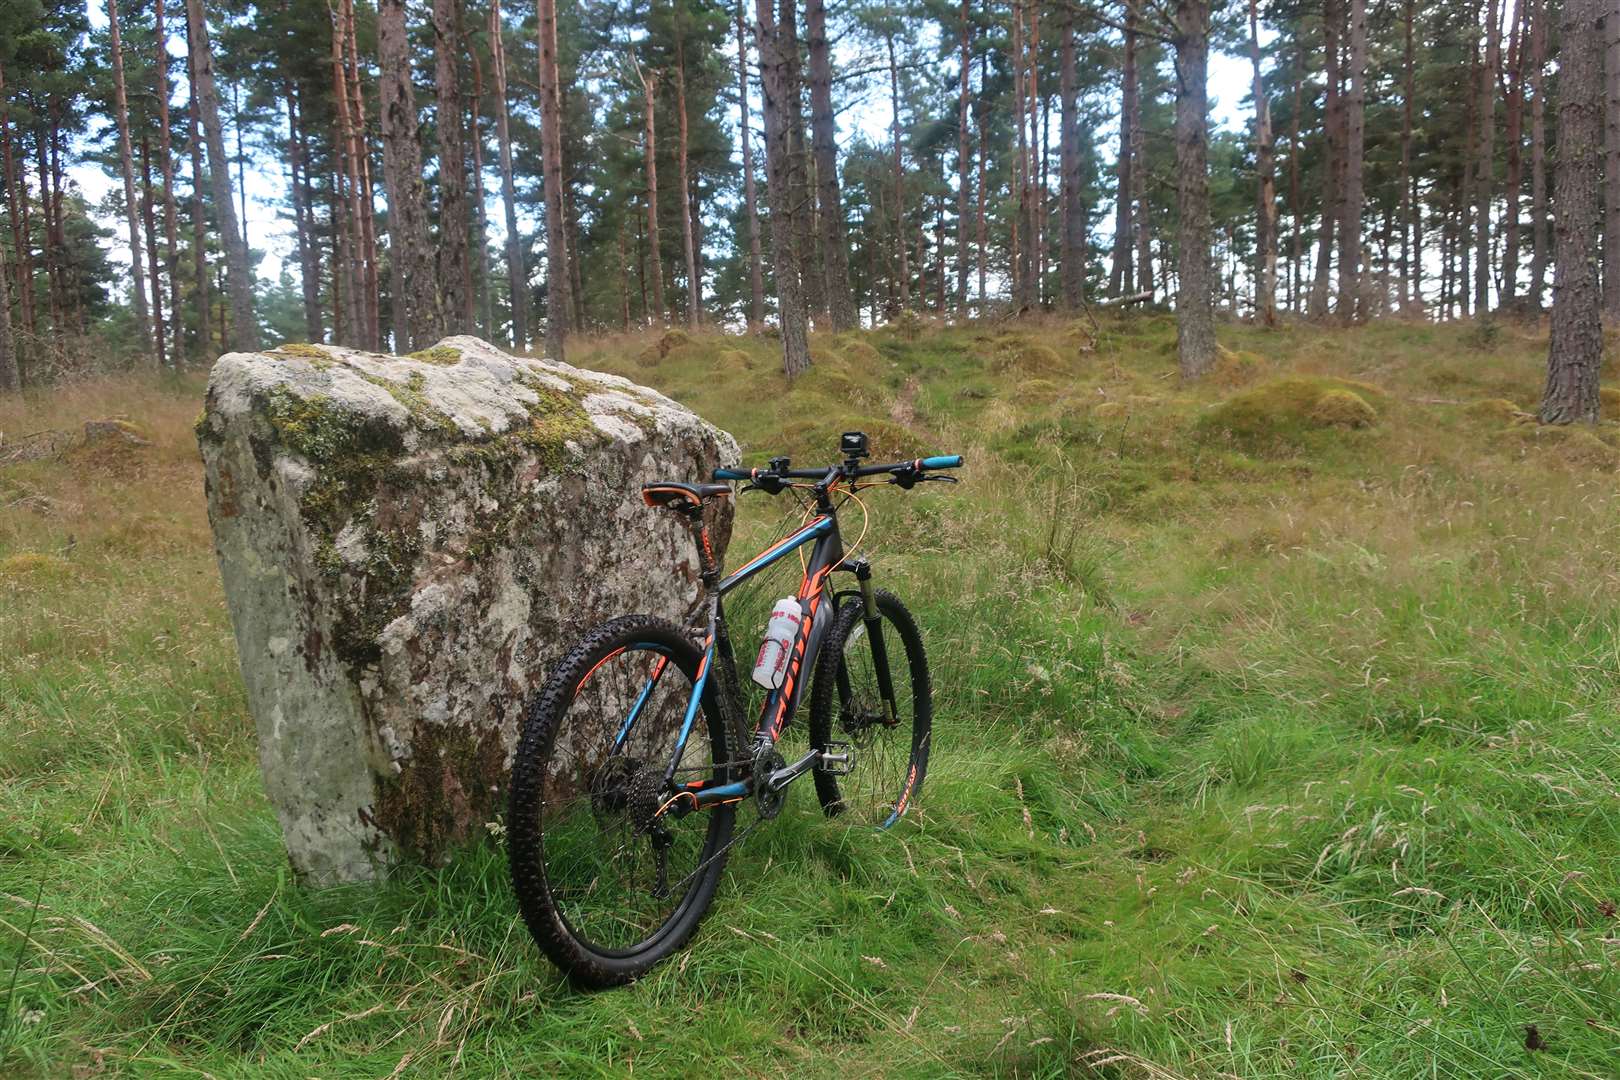 A standing stone beside the singletrack trail.